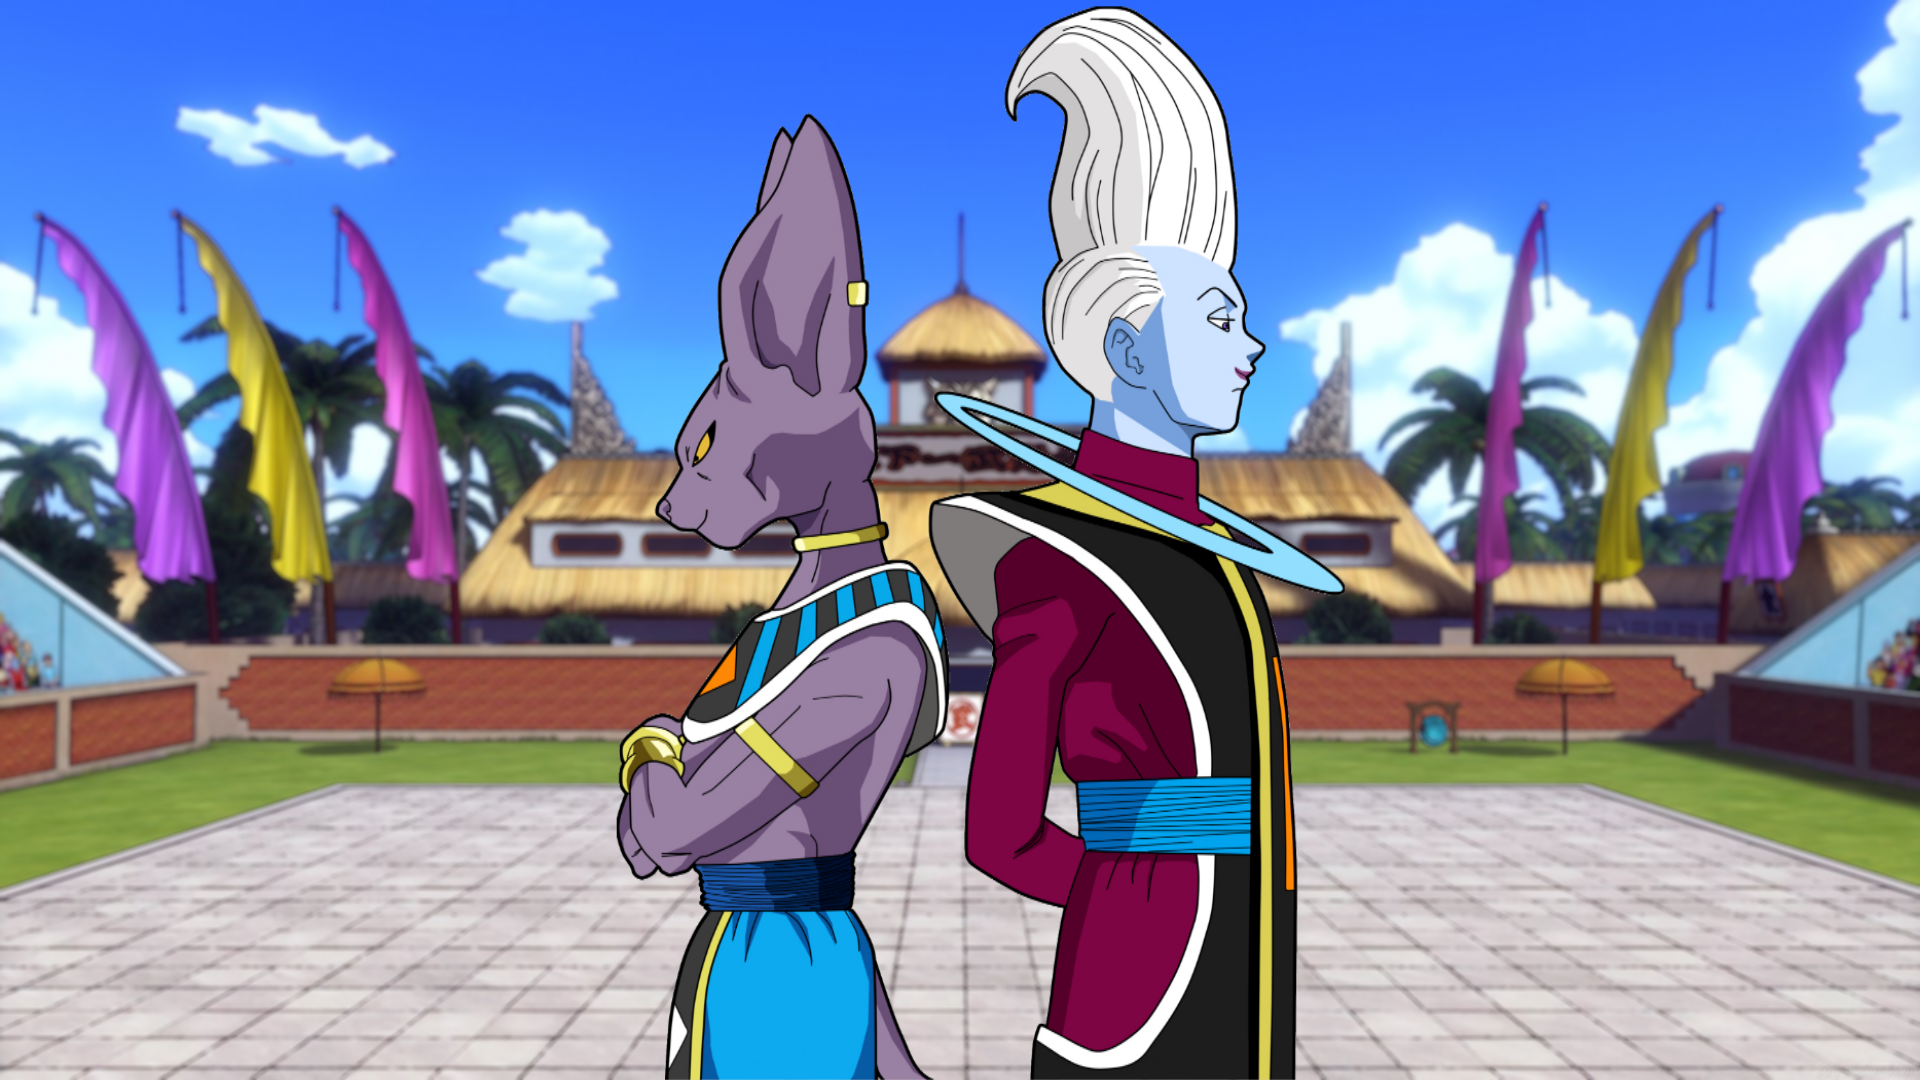 Beerus And Whis Wallpapers - Wallpaper Cave.